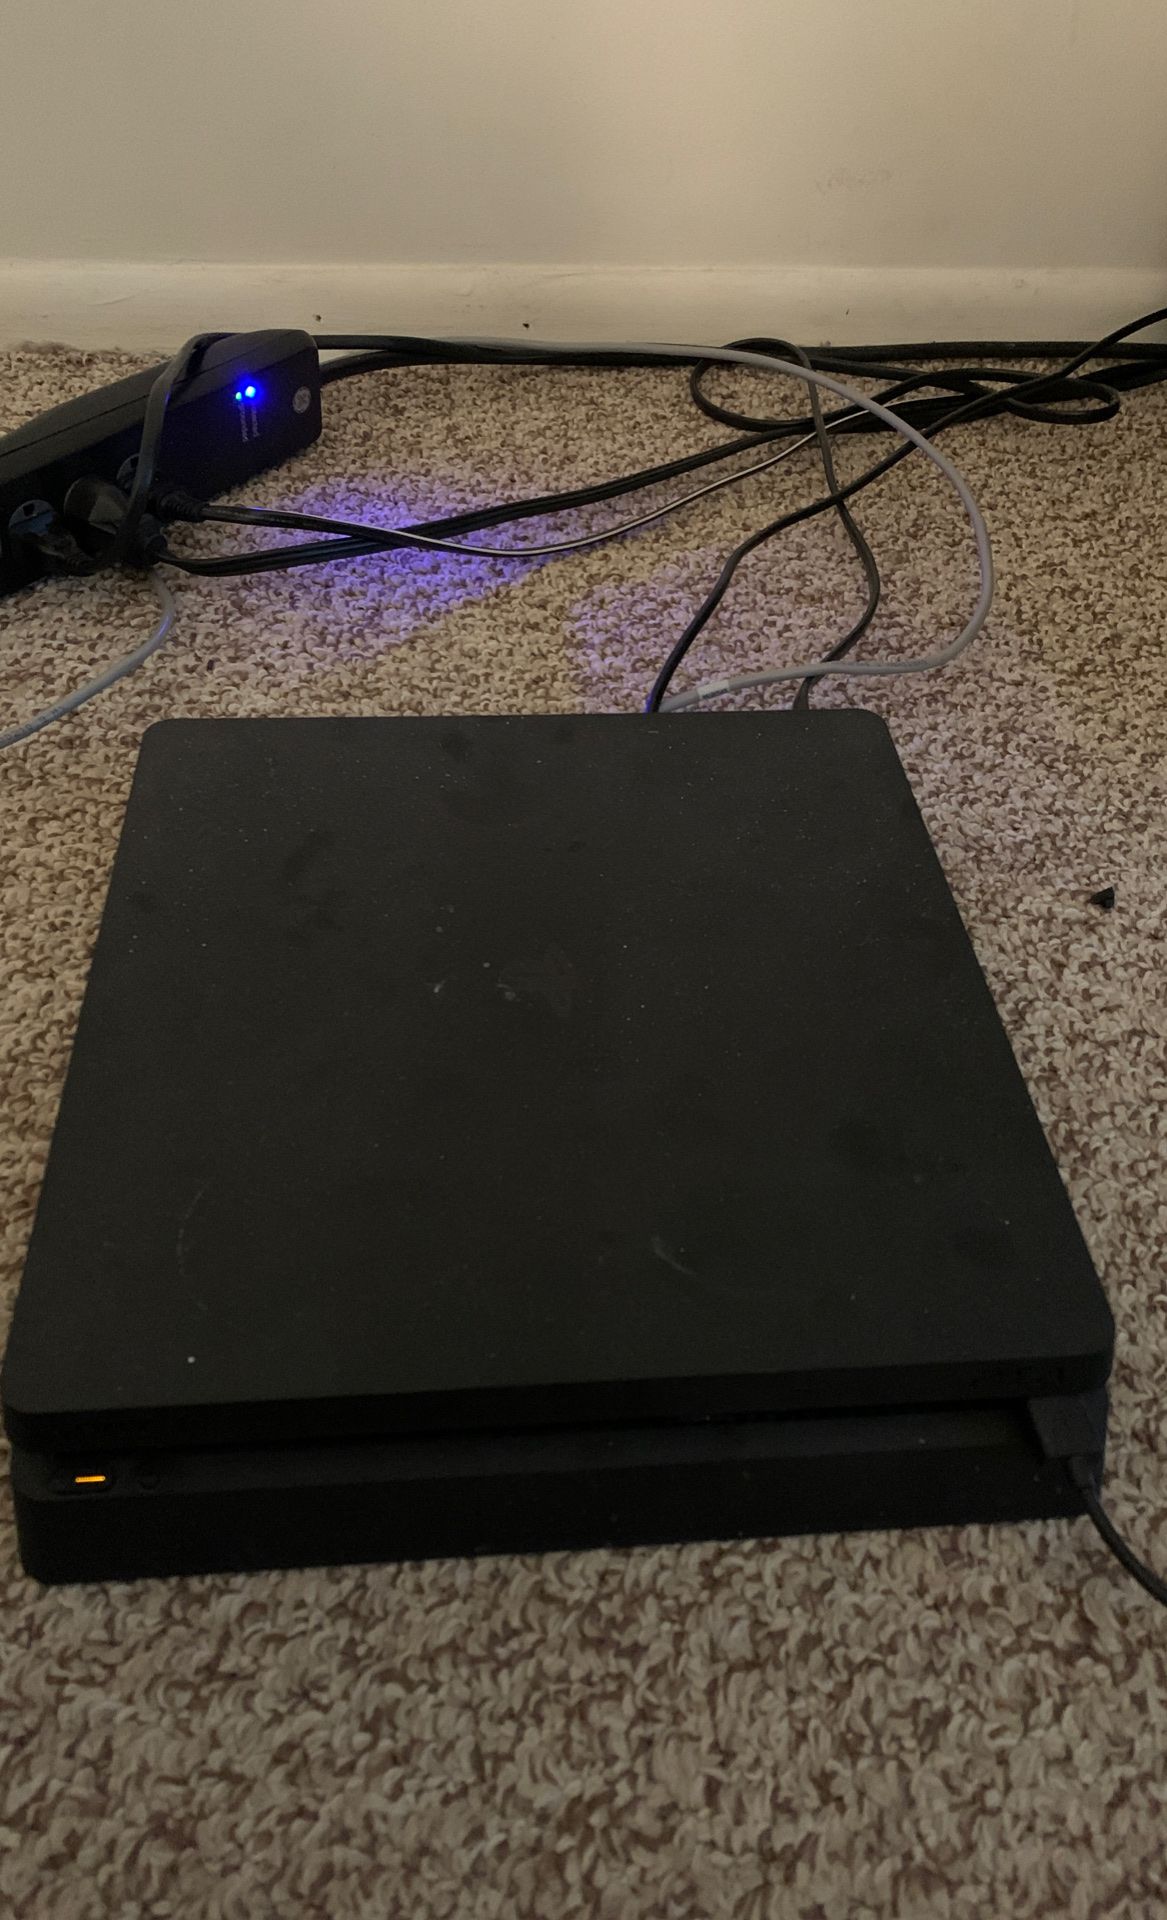 PlayStation 4 500gb Slim for sale !! need it gone fast